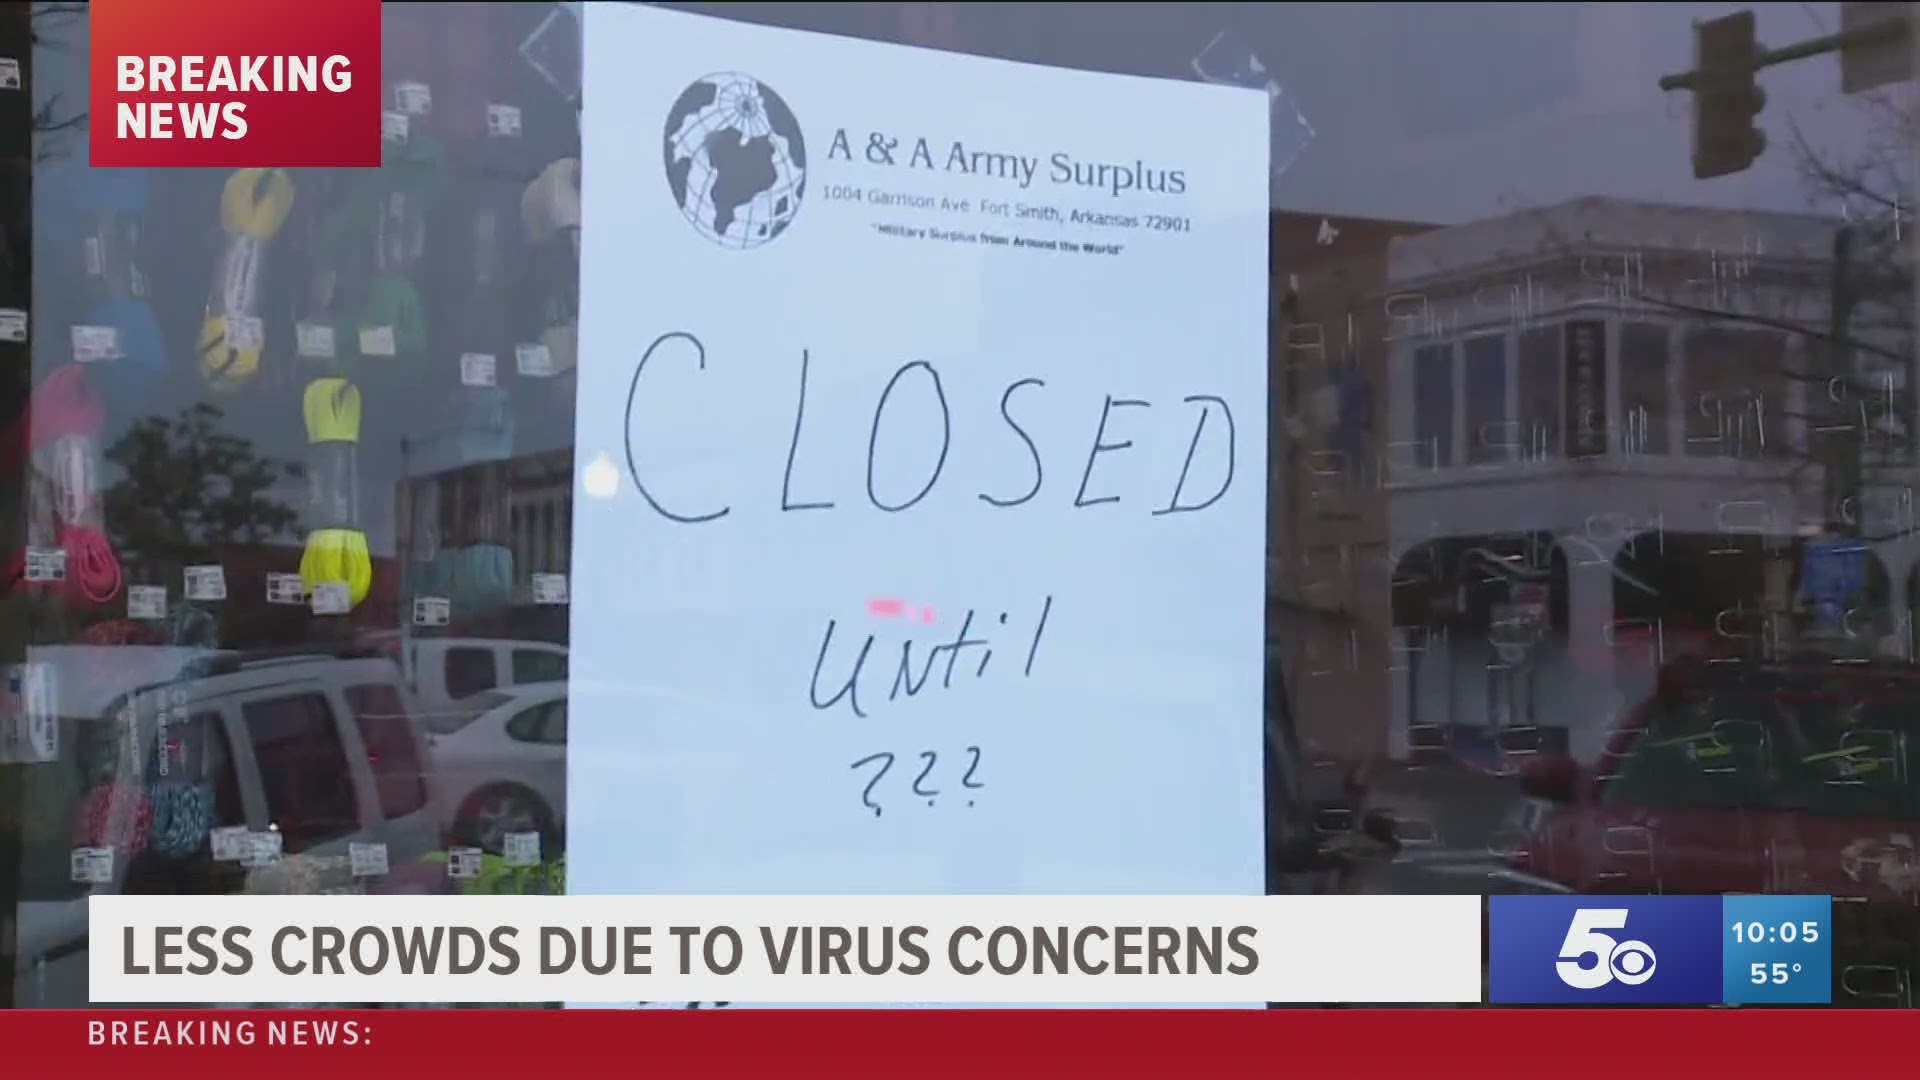 Less crowds on St. Patrick's Day due to coronavirus